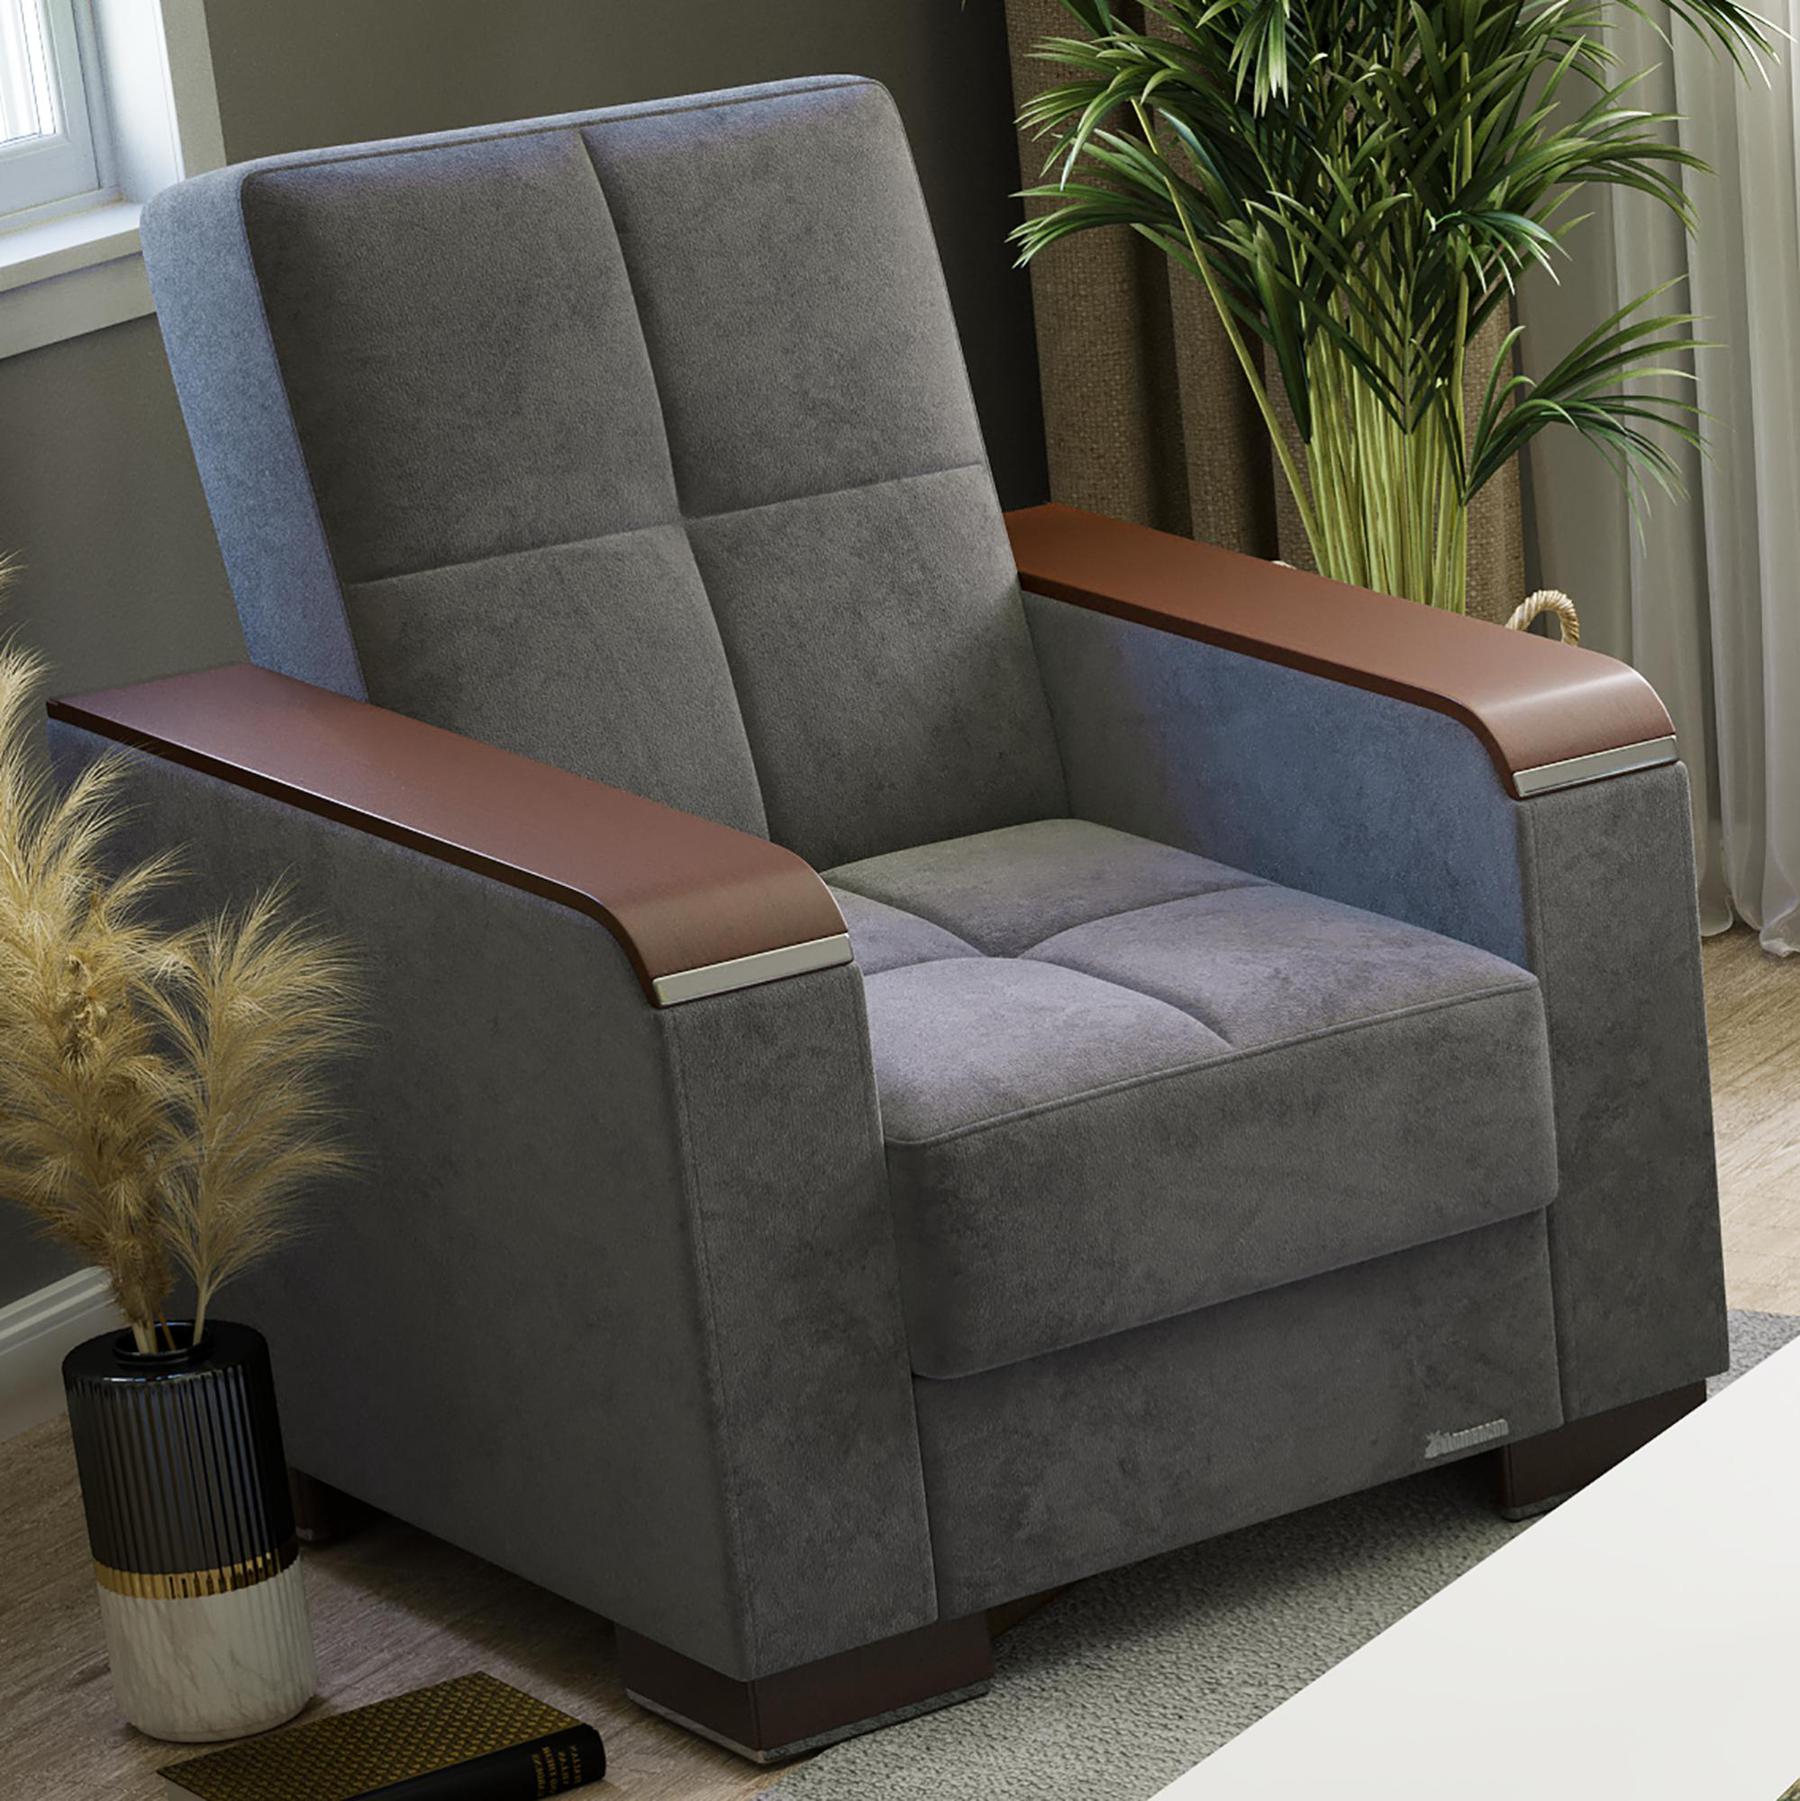 Modern design, Pewter Gray , Microfiber upholstered convertible Armchair with underseat storage from Voyage Luxe by Ottomanson in living room lifestyle setting by itself. This Armchair measures 38 inches width by 36 inches depth by 41 inches height.